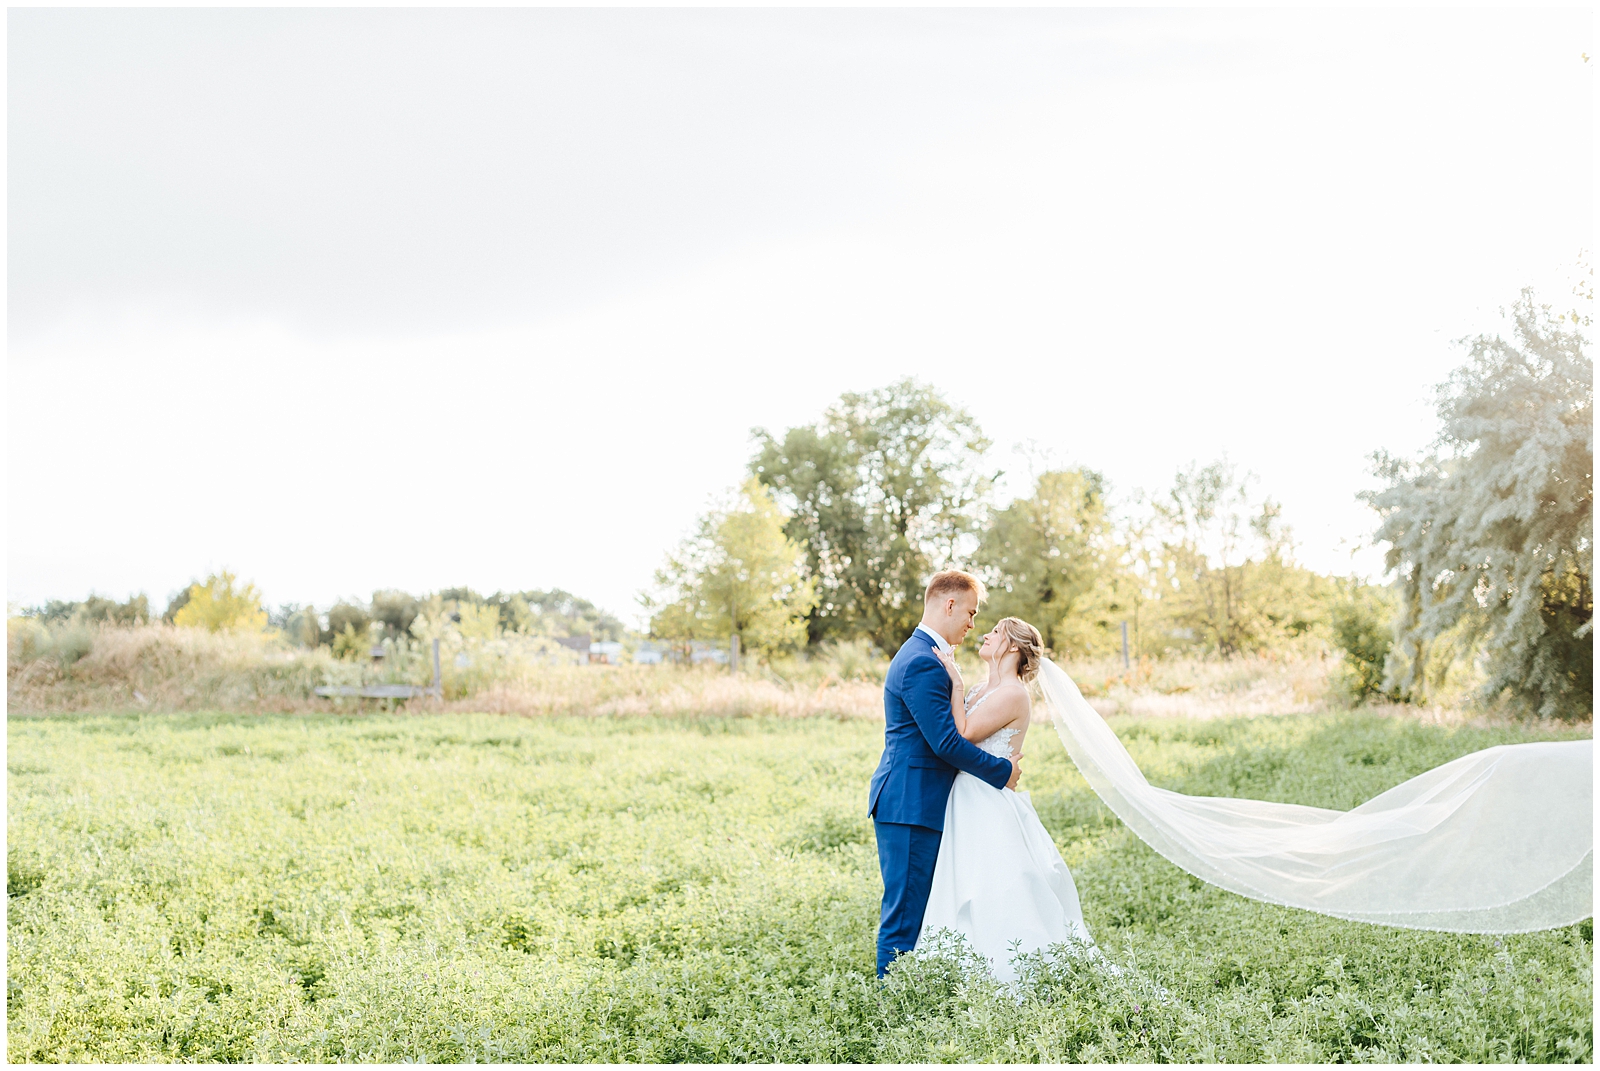 Cathedral Length Floating Veil at Husband and Wife Golden Hour Portraits at Fourth Street Gardens Wedding